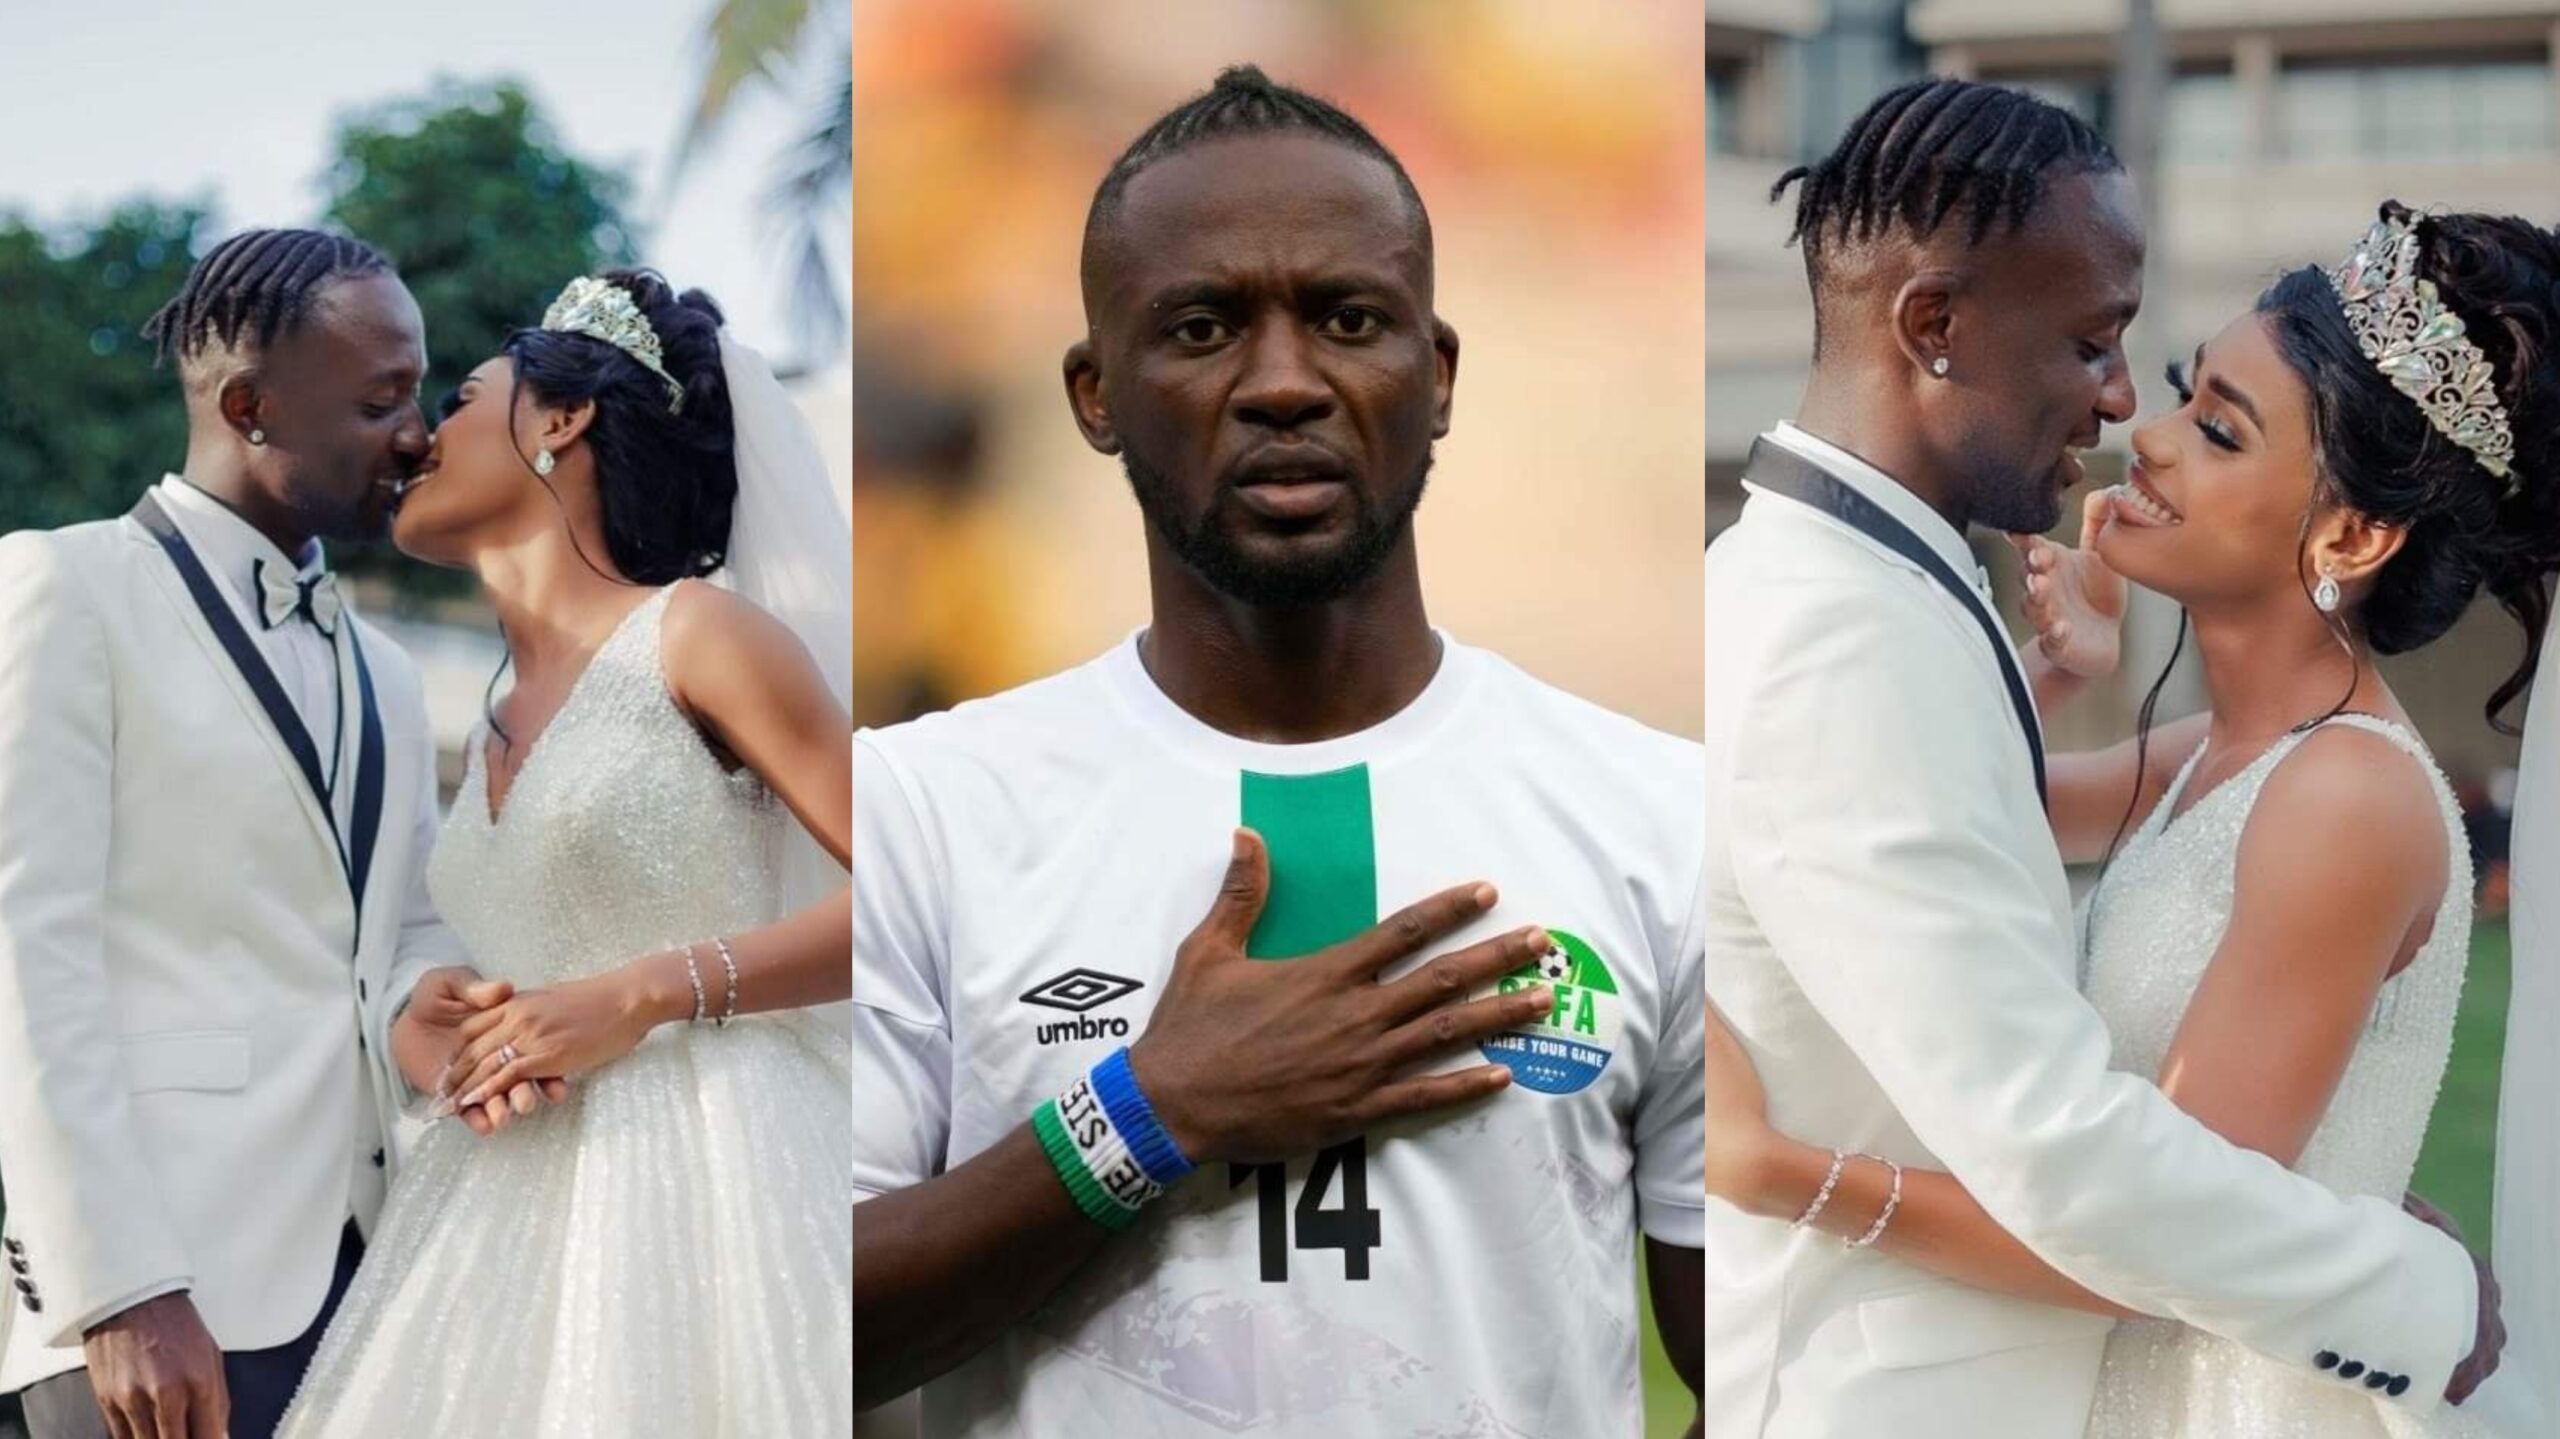 Footballer Misses His Wedding To Sign New Contract, Asks His Brother To Represent Him As The Groom » NewzAcid•com™